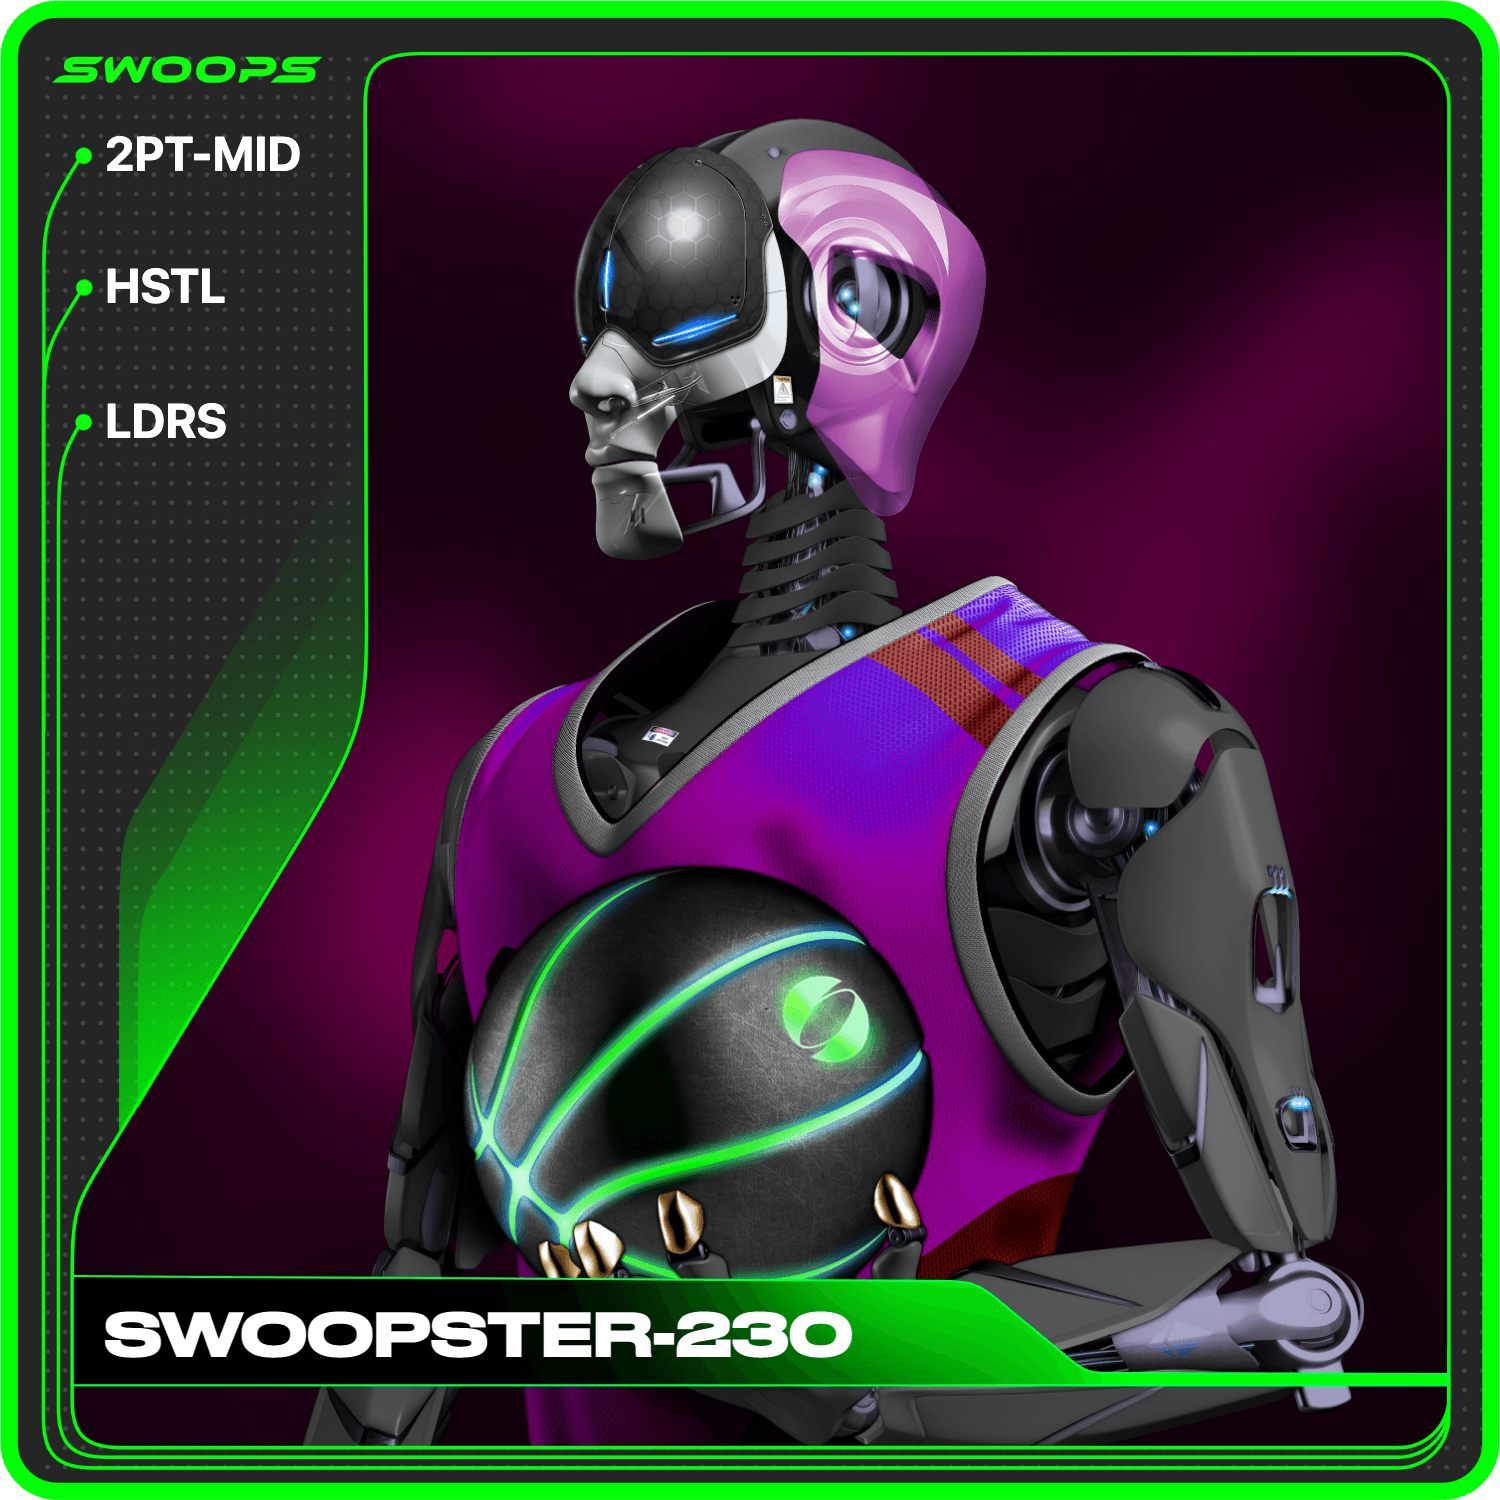 SWOOPSTER-230